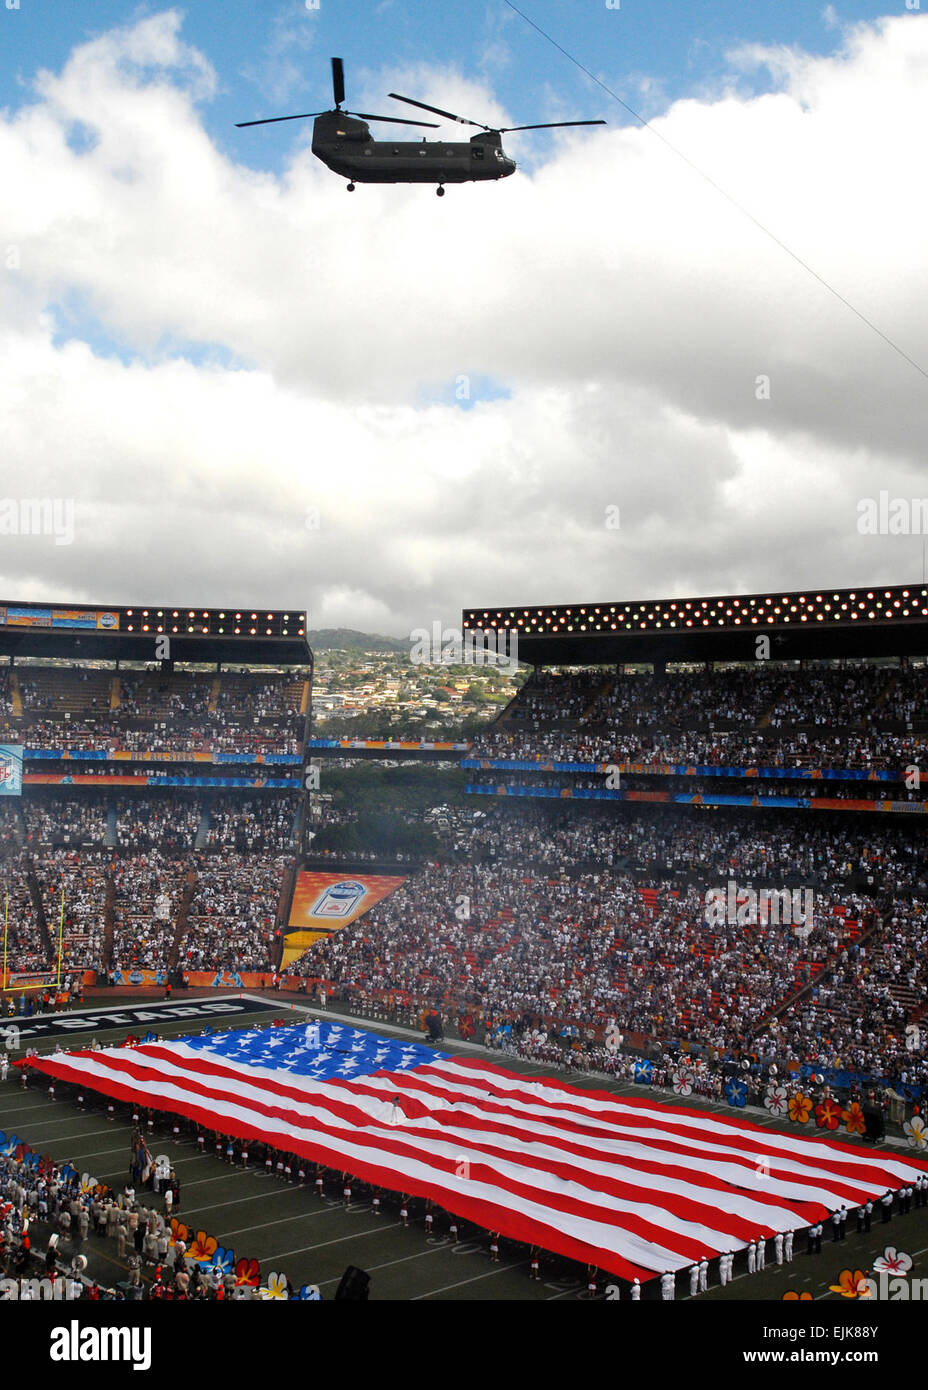 A Hawaii Army National Guard CH-47 Chinook helicopter flies above Aloha Stadium during the national anthem during pre-game ceremonies for the 2008 NFL Pro Bowl in Honolulu, Hawaii, Feb. 10, 2008. The annual event, which features all-star players from the National Football Conference and the American Football Conference, has been held at Aloha Stadium for 29 consecutive years.  Mass Communication Specialist 2nd Class Michael Hight Stock Photo